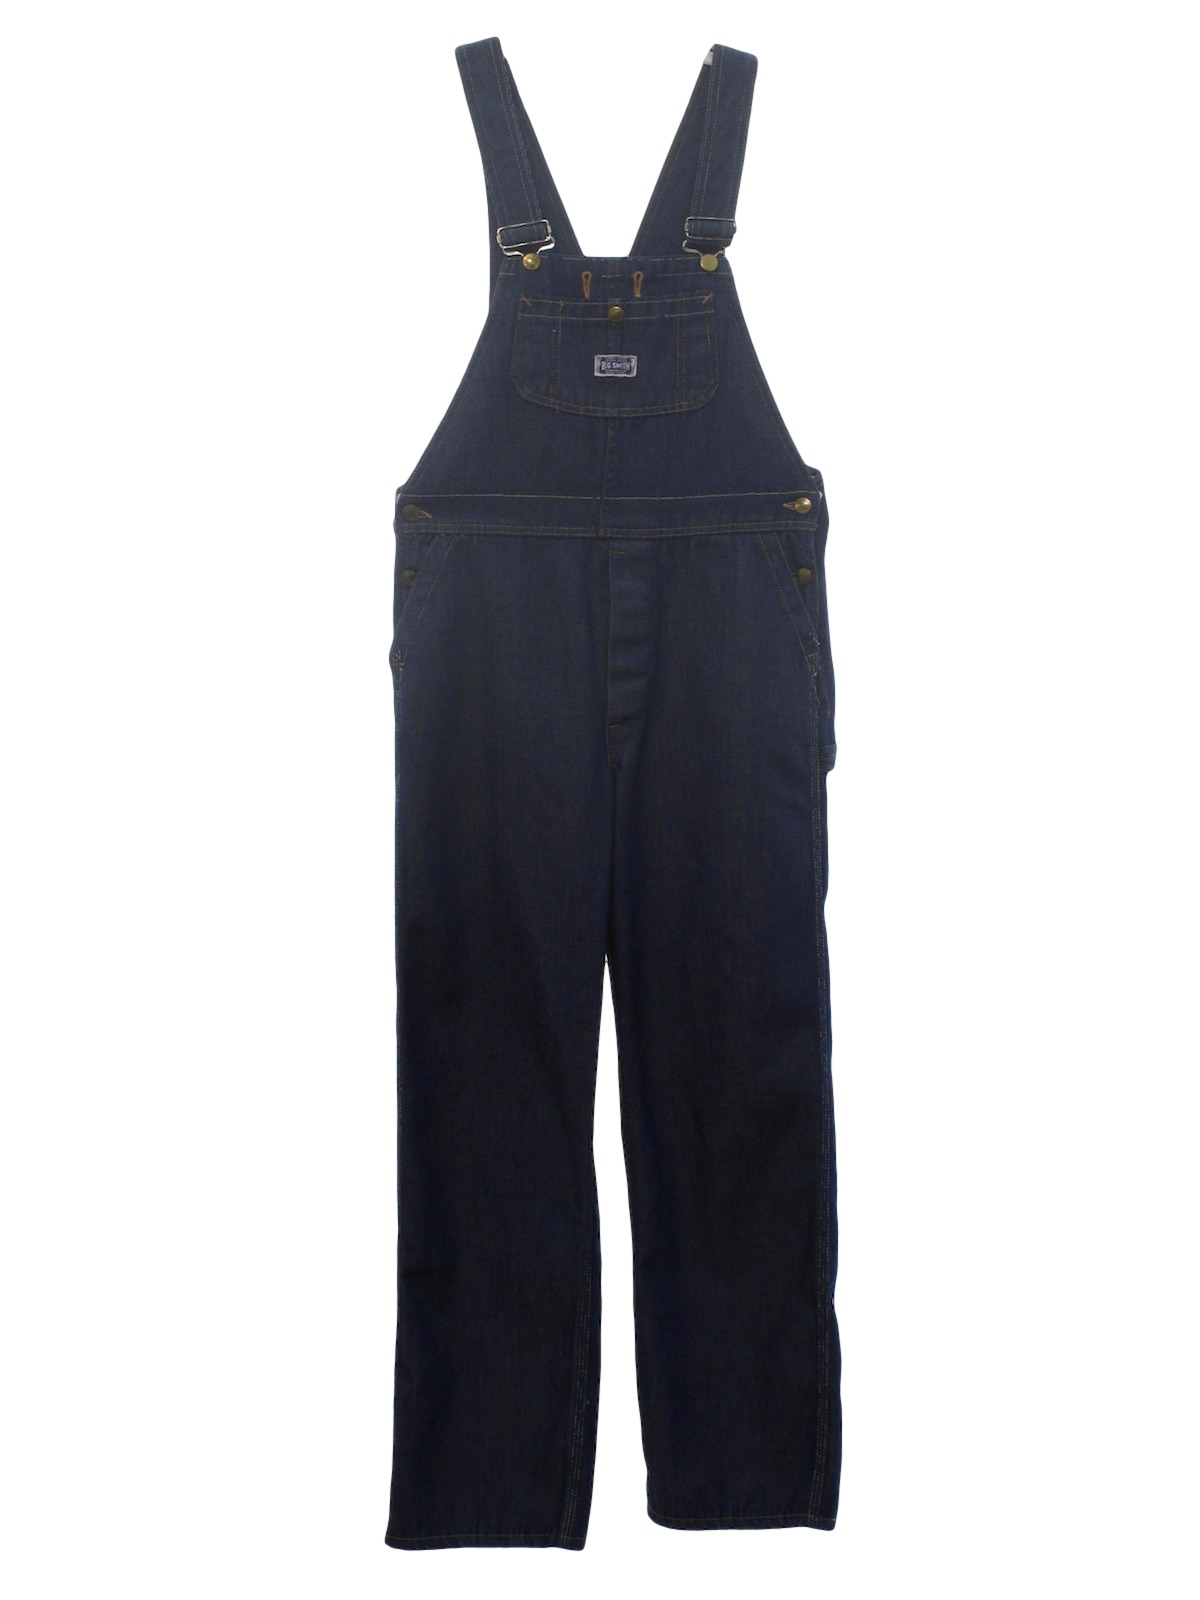 Big Smith Union Made Sanforized 1960s Vintage Overalls: Late 60s -Big ...